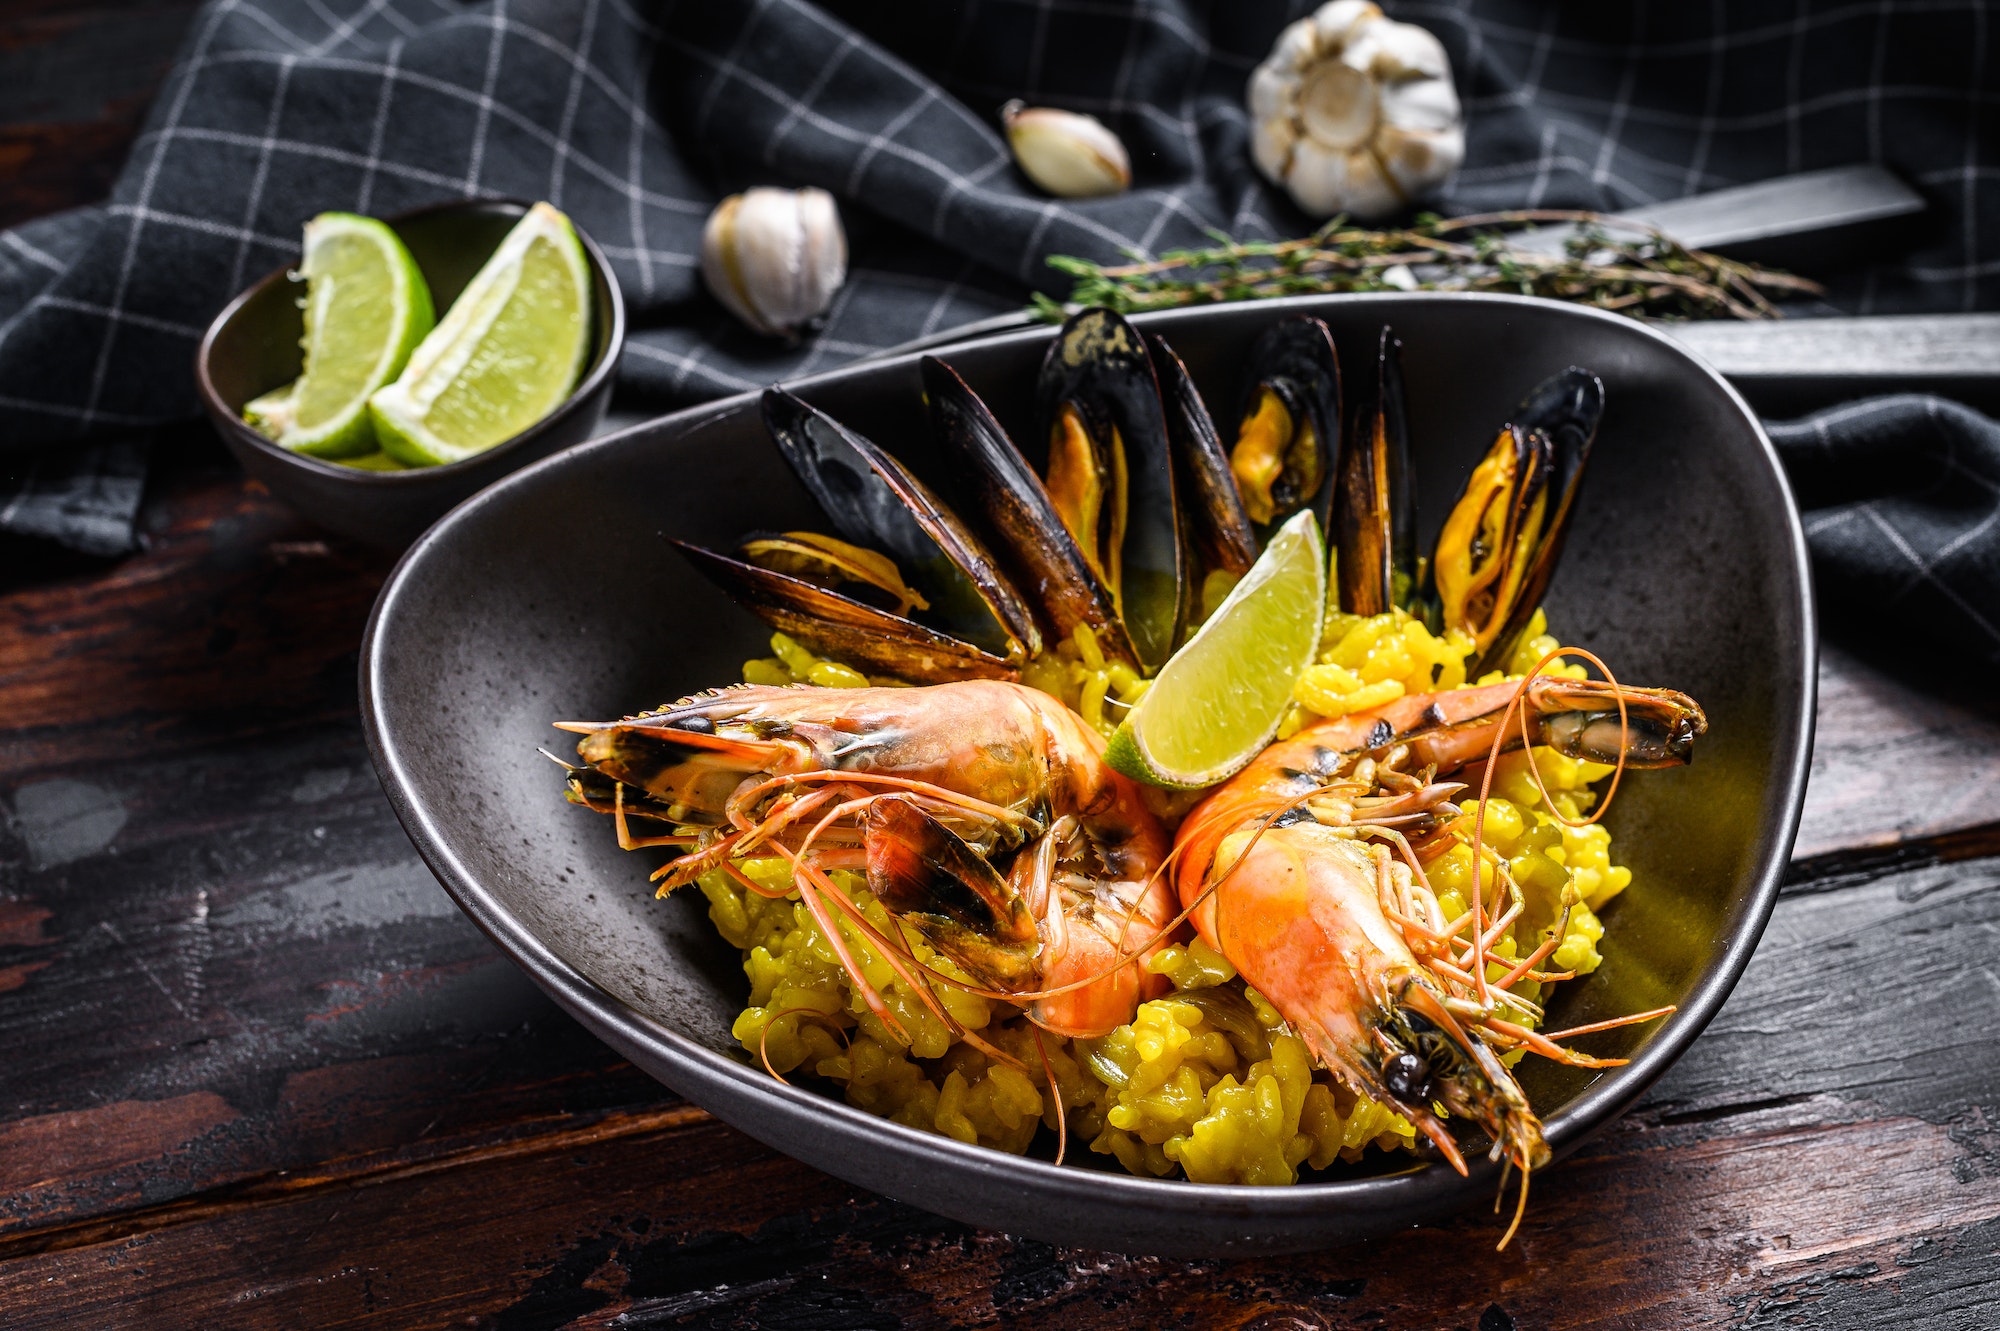 The Spanish Seafood paella with prawns, shrimps, octopus and mussels